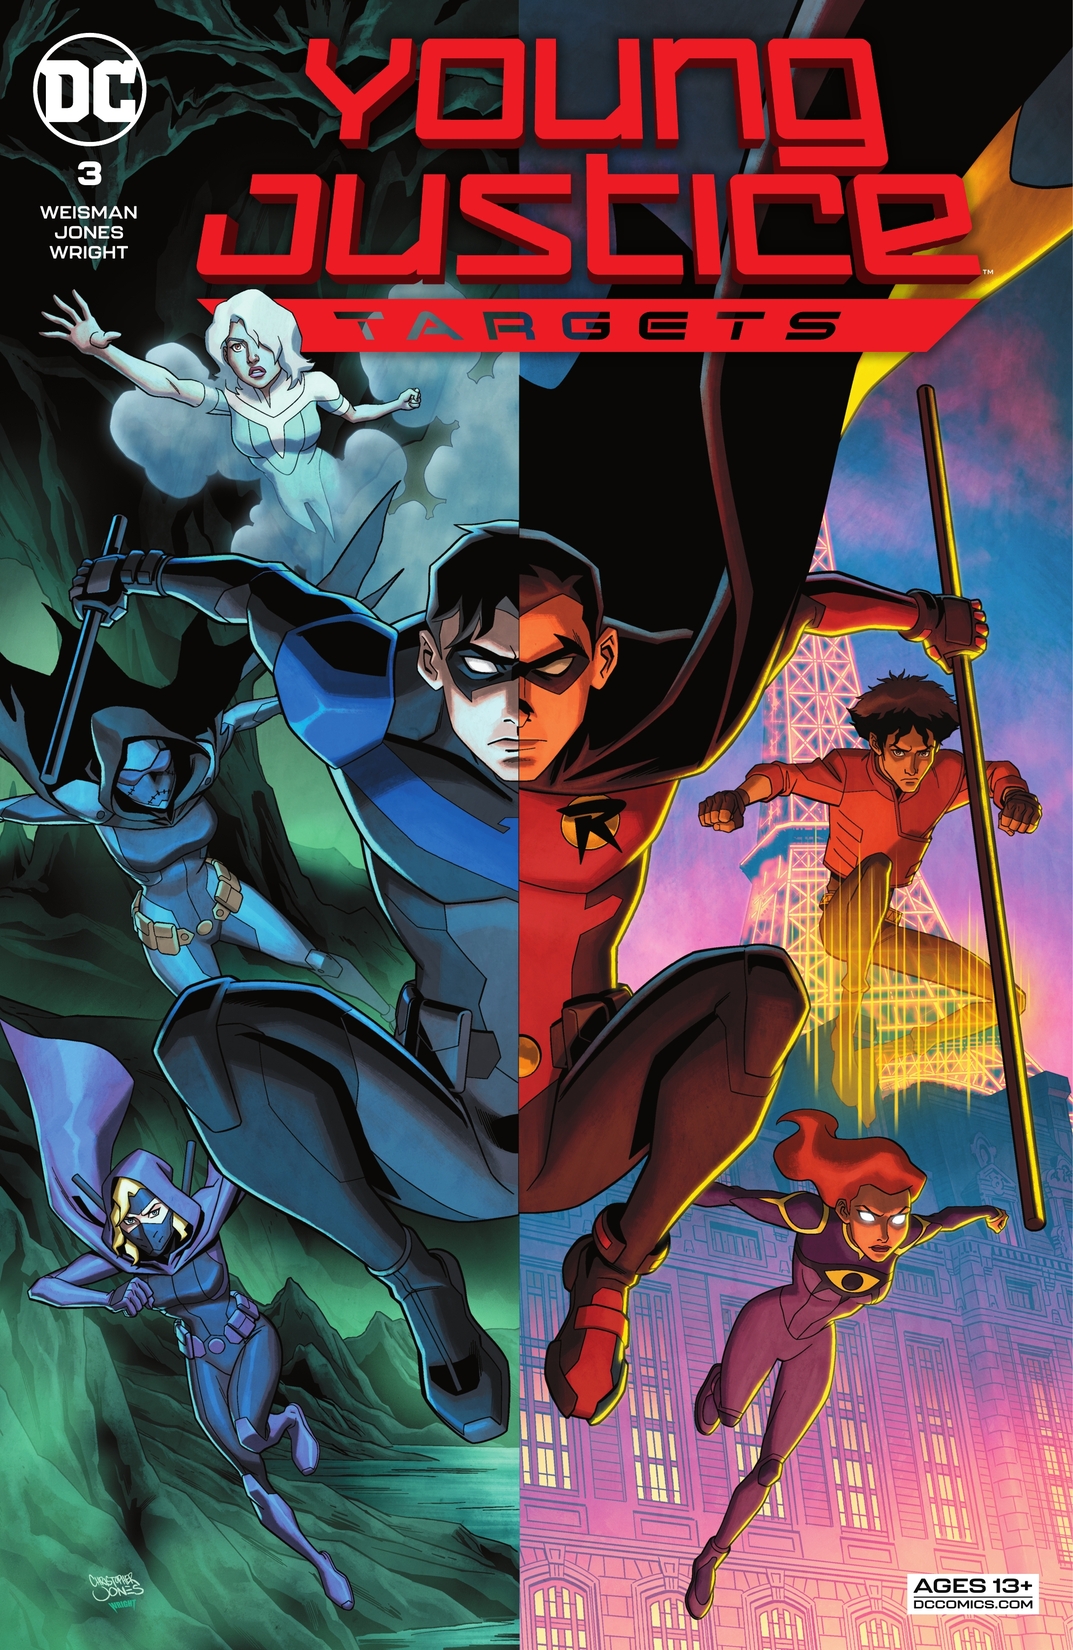 Young Justice: Targets Director's Cut #3 preview images